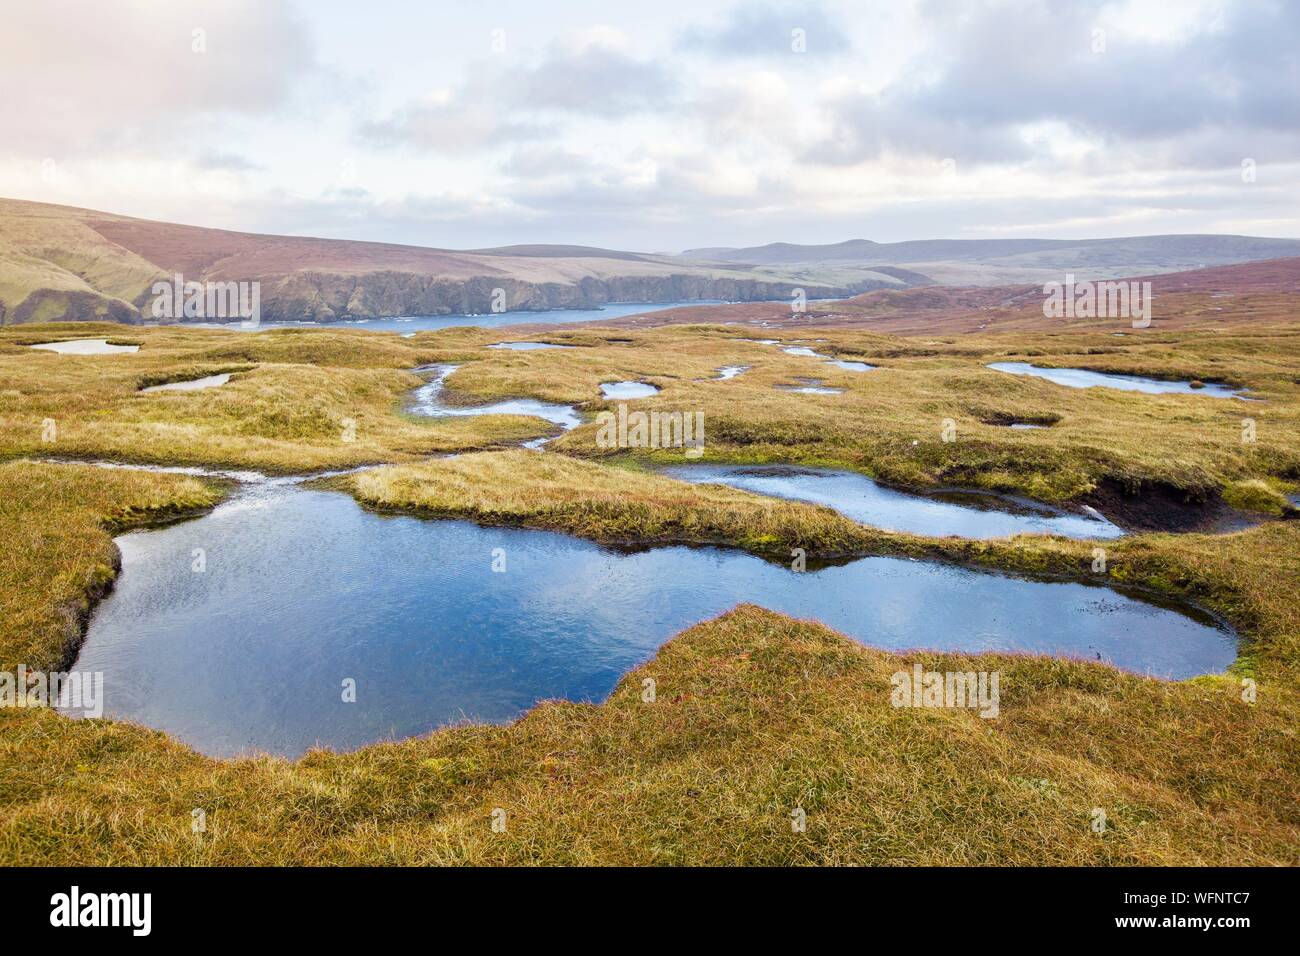 United Kingdom, Scotland, Shetland Islands, Unst island, Hermaness National Nature Reserve, soil made of peat and saturatd with water Stock Photo